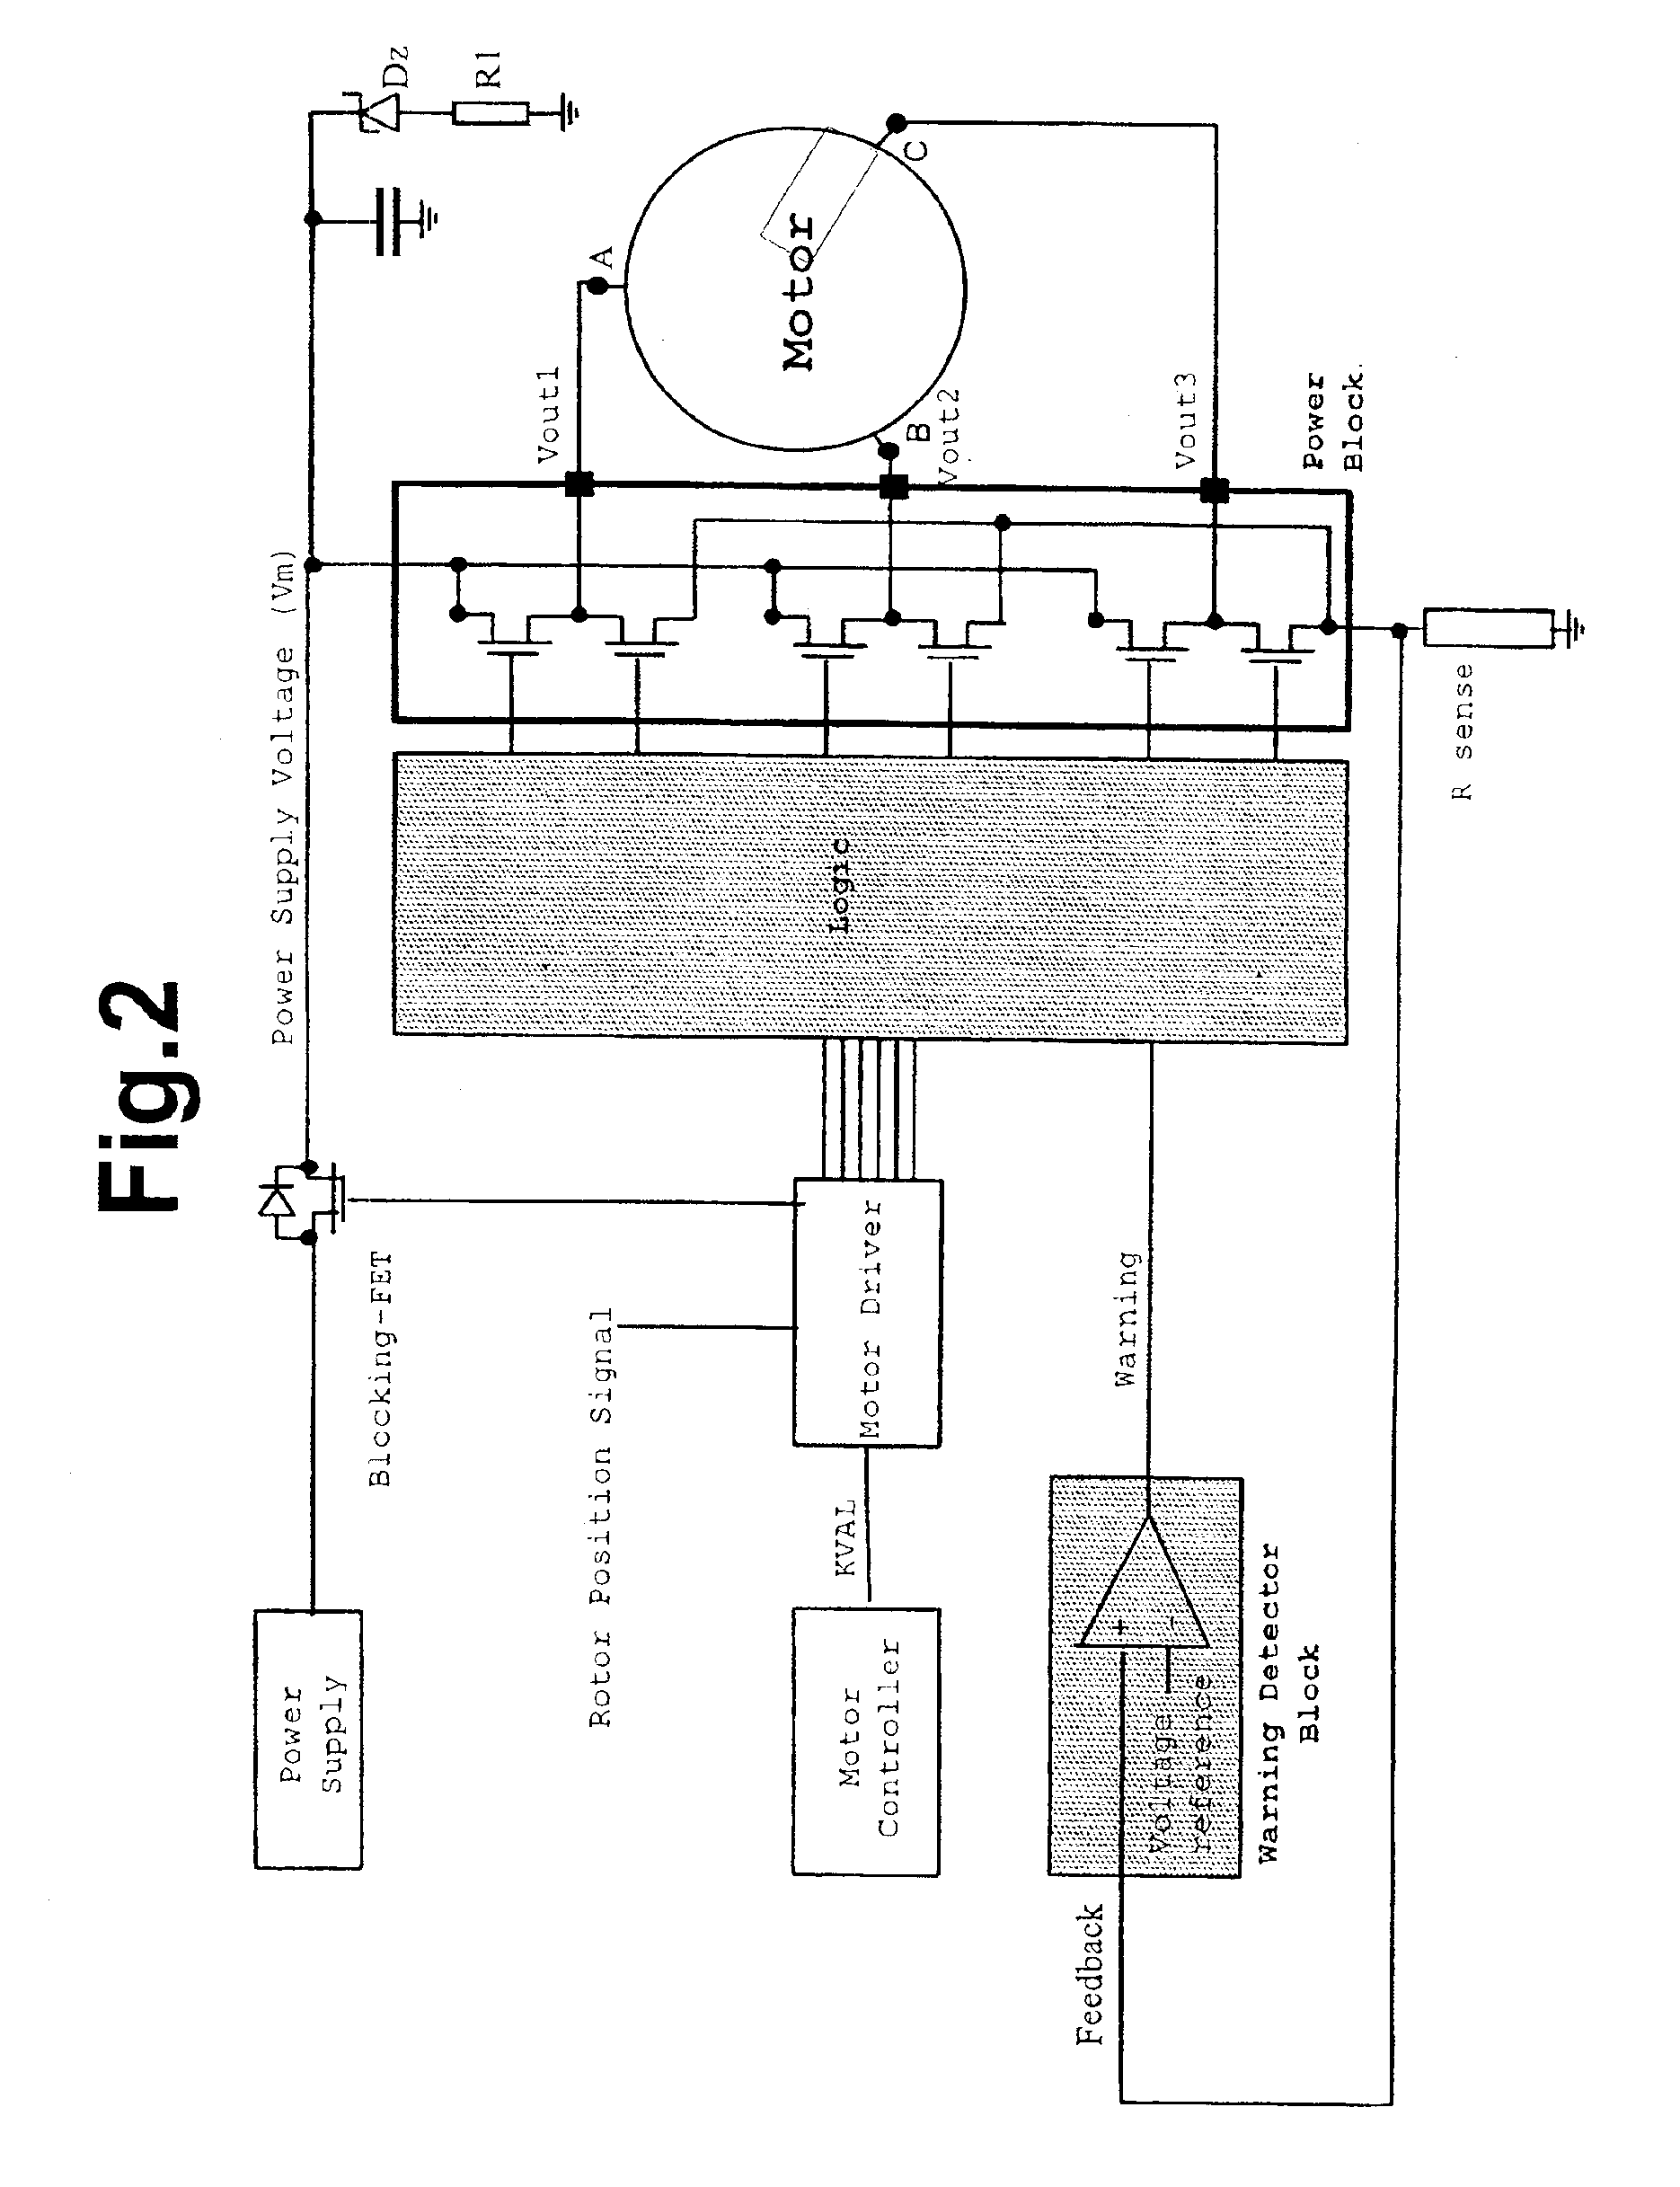 Driving circuit and method for preventing voltage surges on supply lines while driving a DC motor